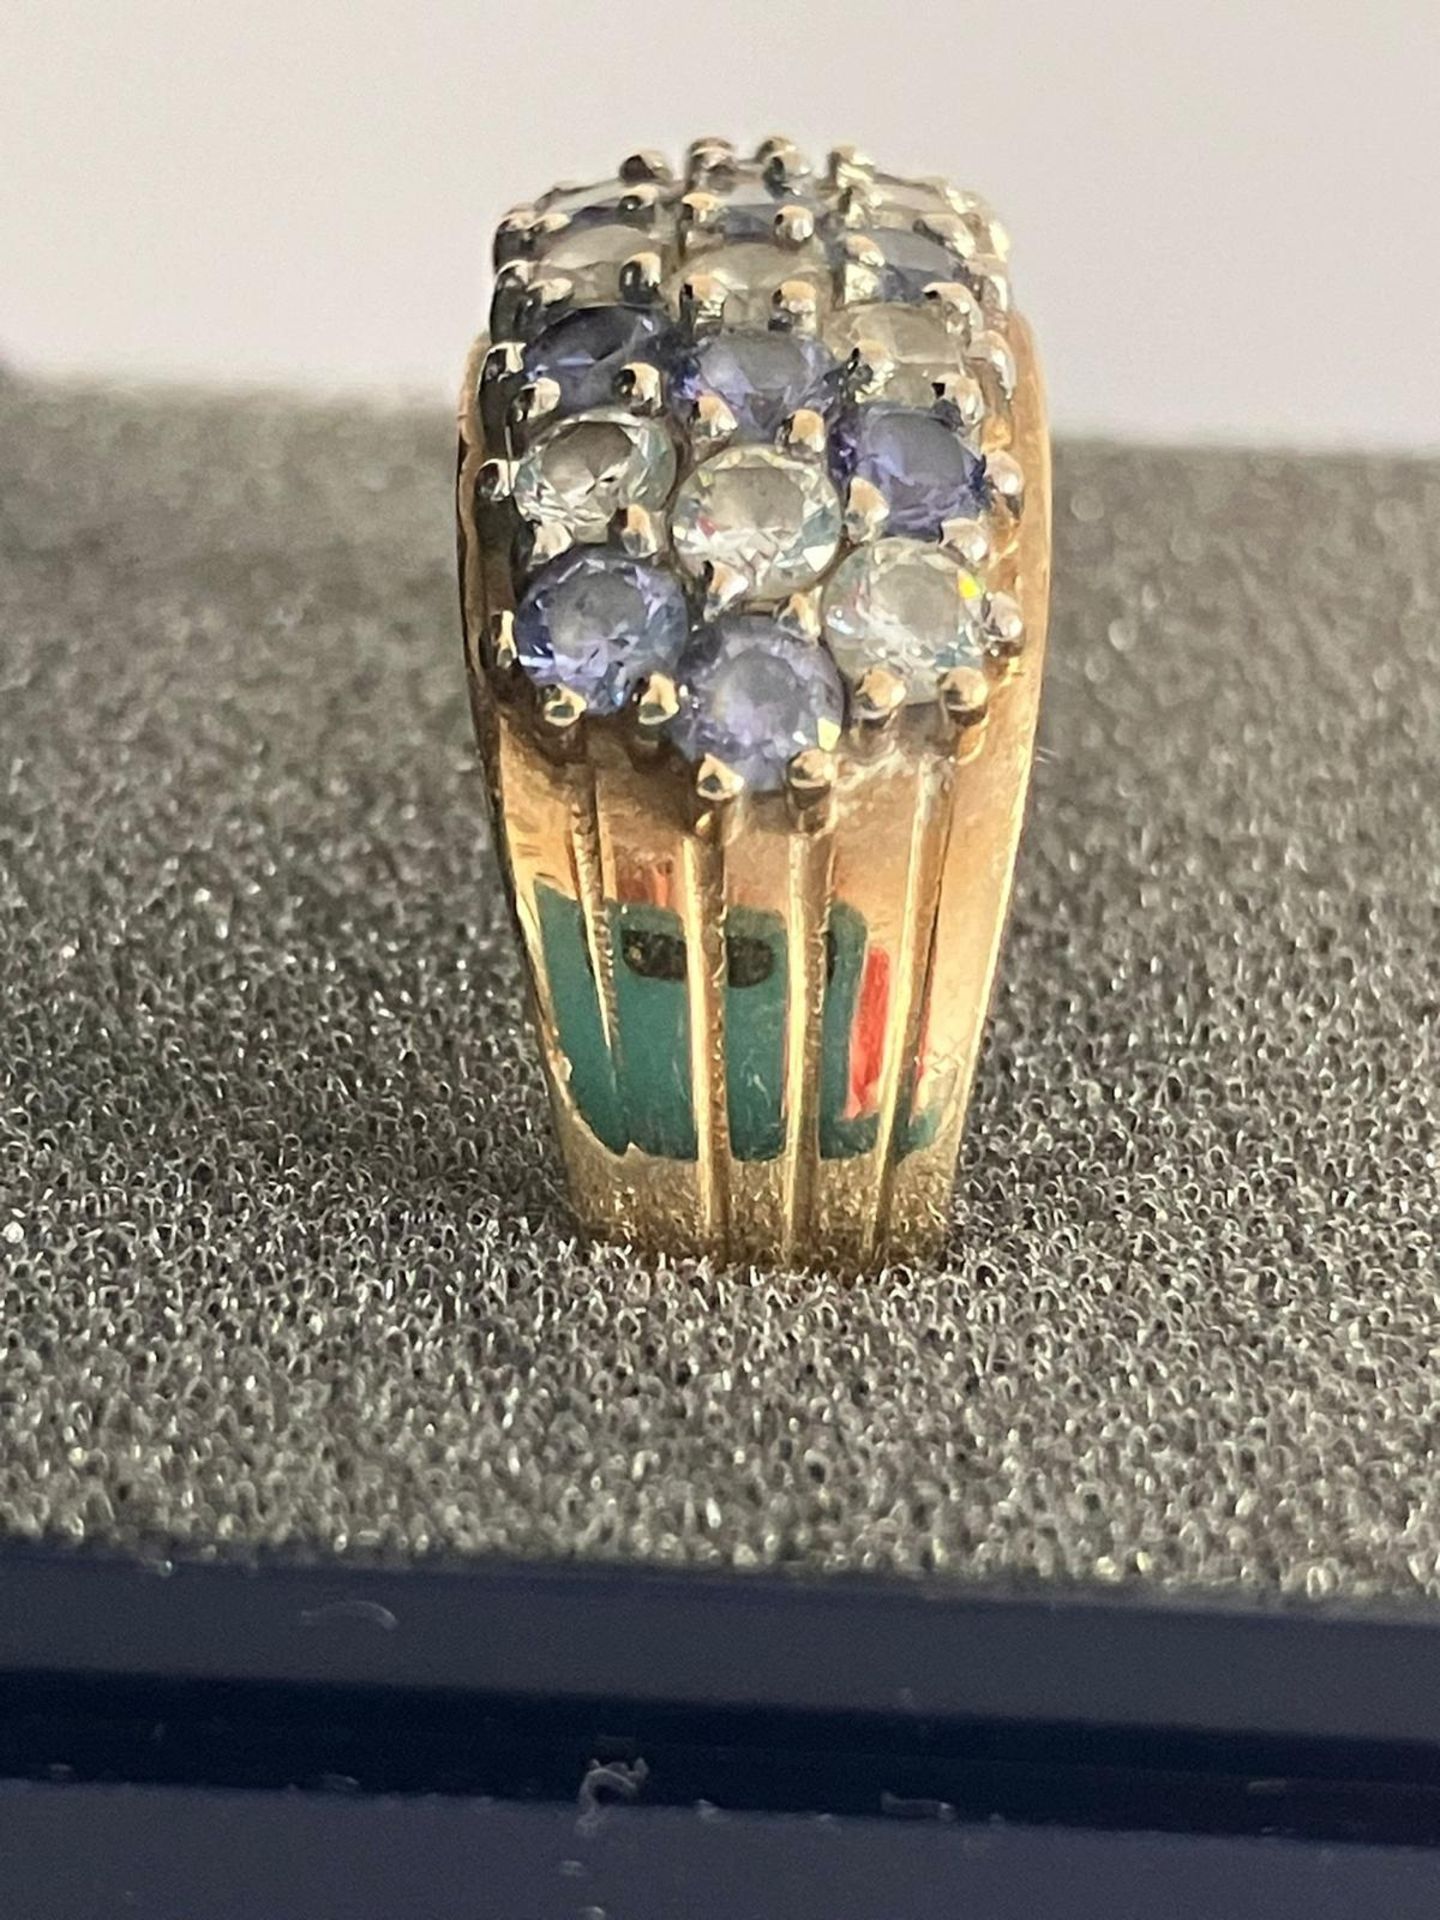 Magnificent 9 carat YELLOW GOLD RING set with BLUE and WHITE GEMSTONES. 3.75 grams. Size R. - Image 2 of 3